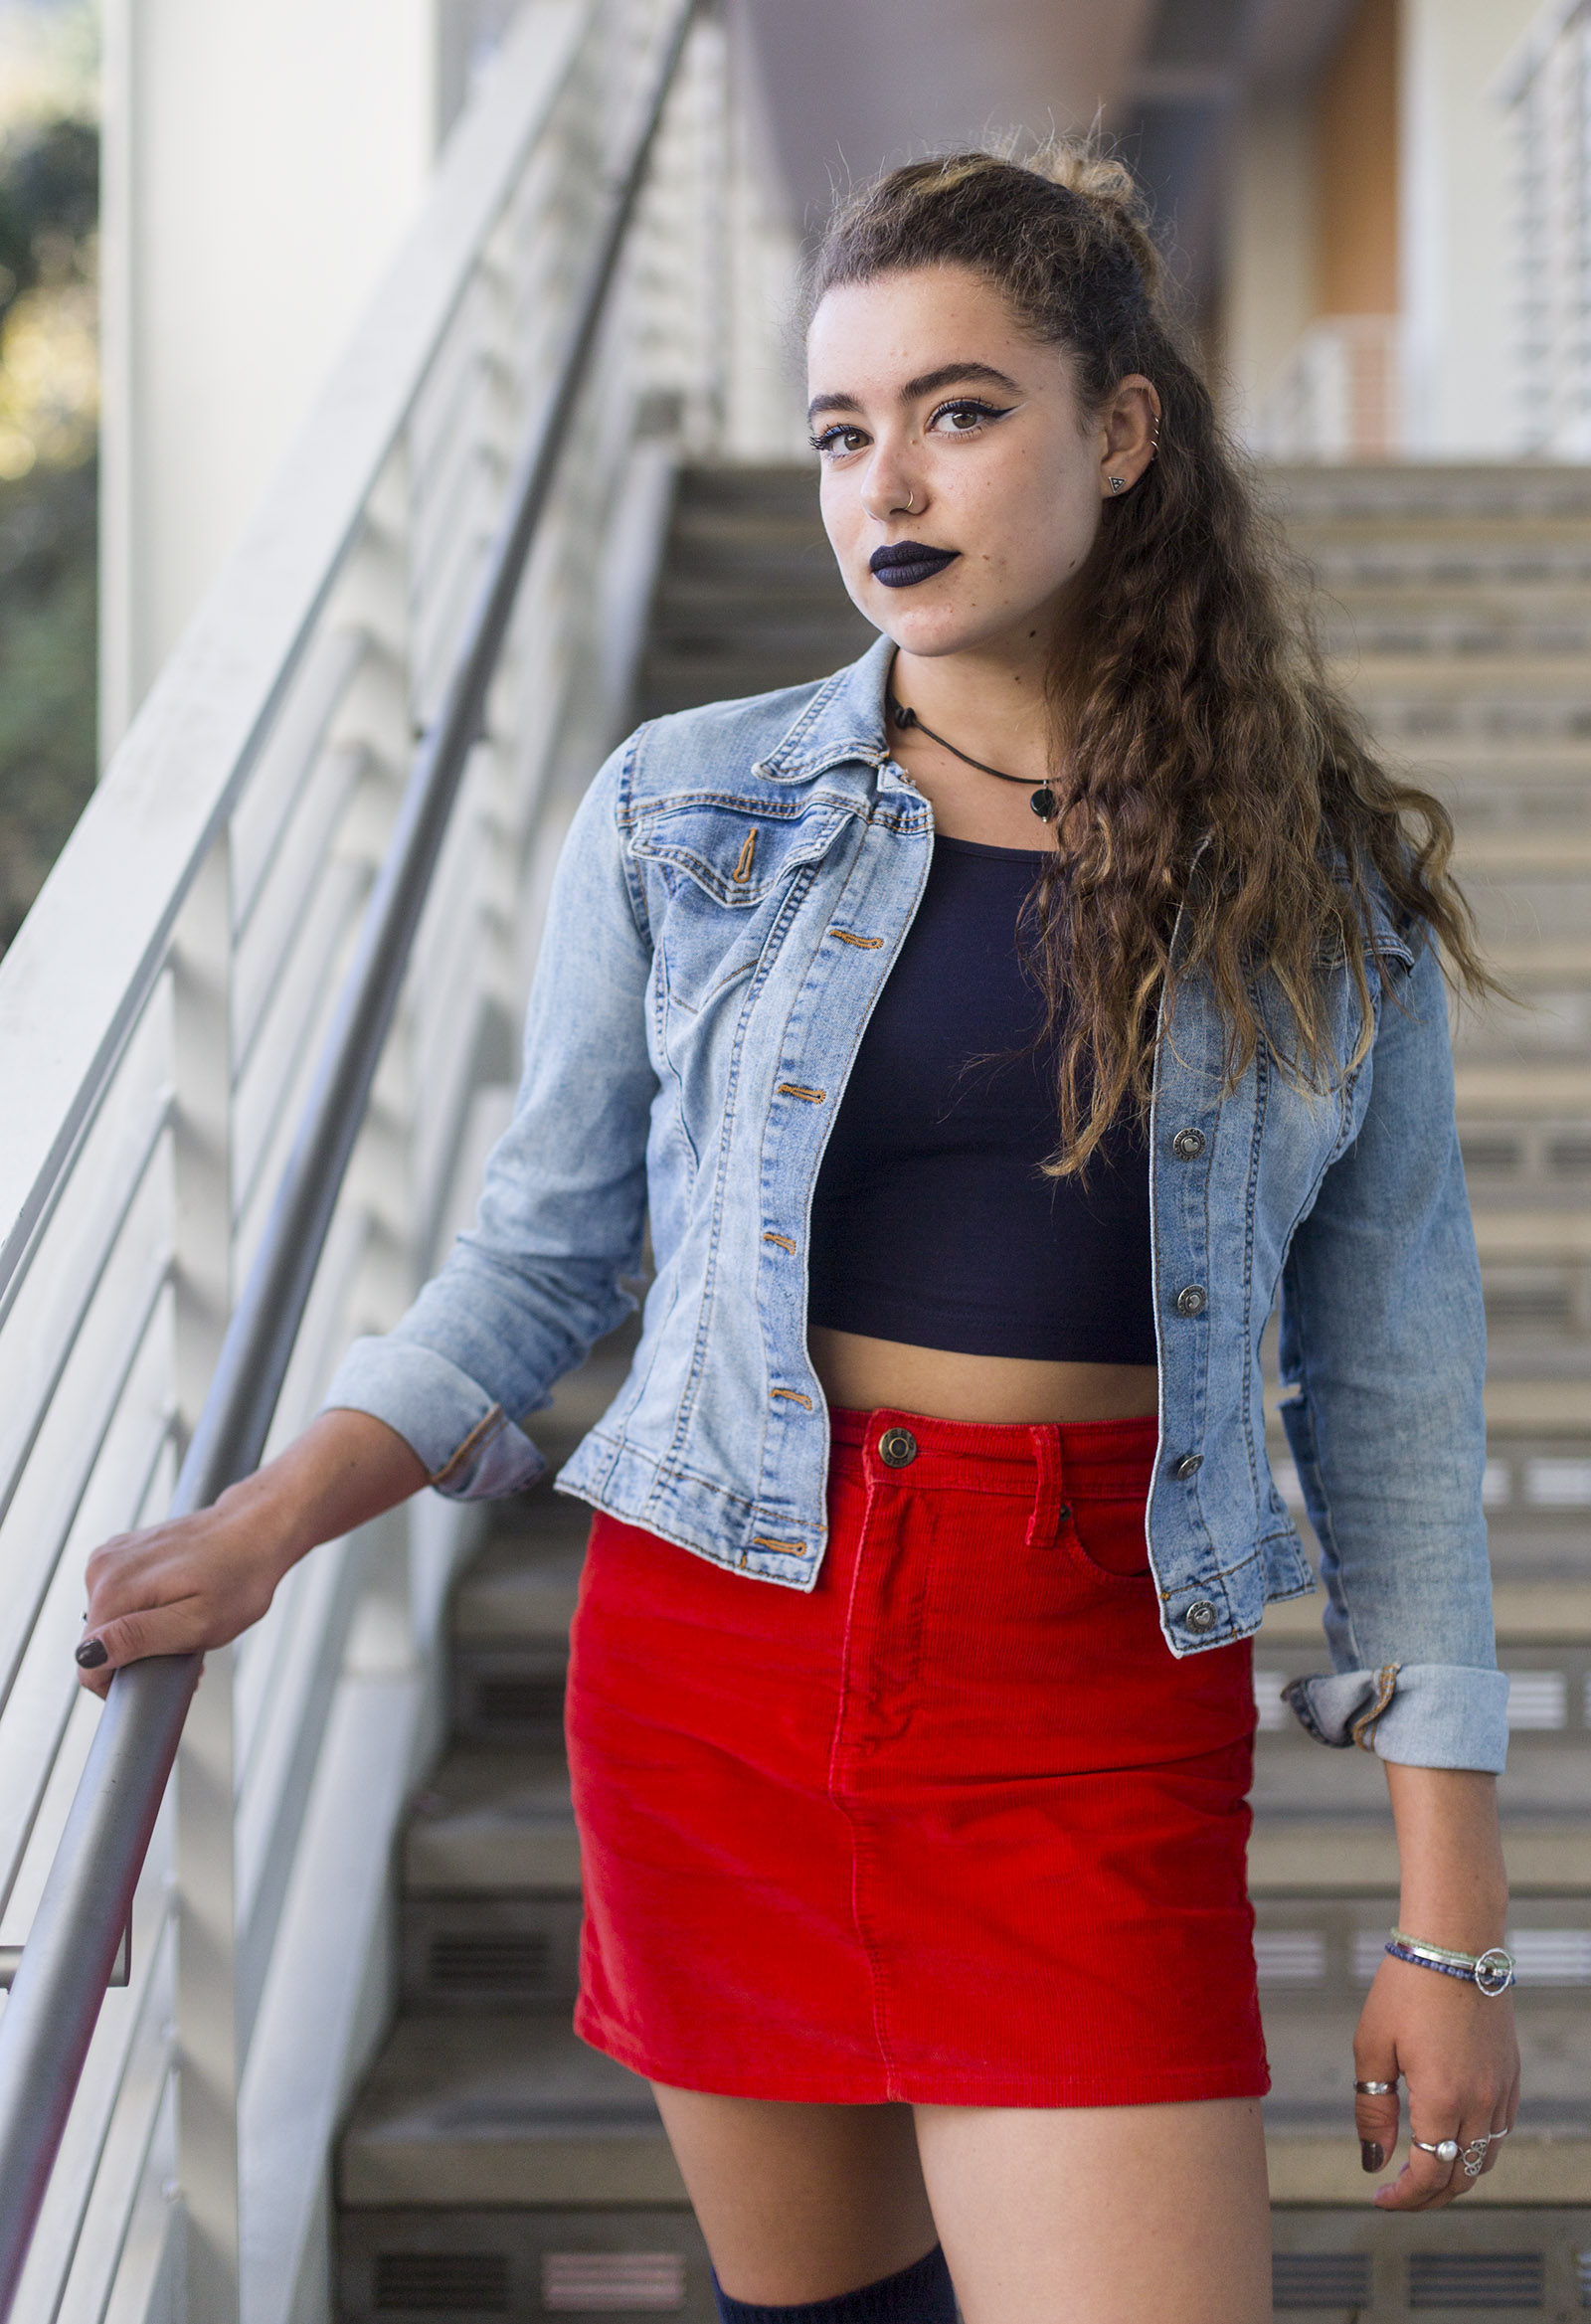 UCLA students find nostalgia in casual, edgy '90s fashion throwbacks -  Daily Bruin